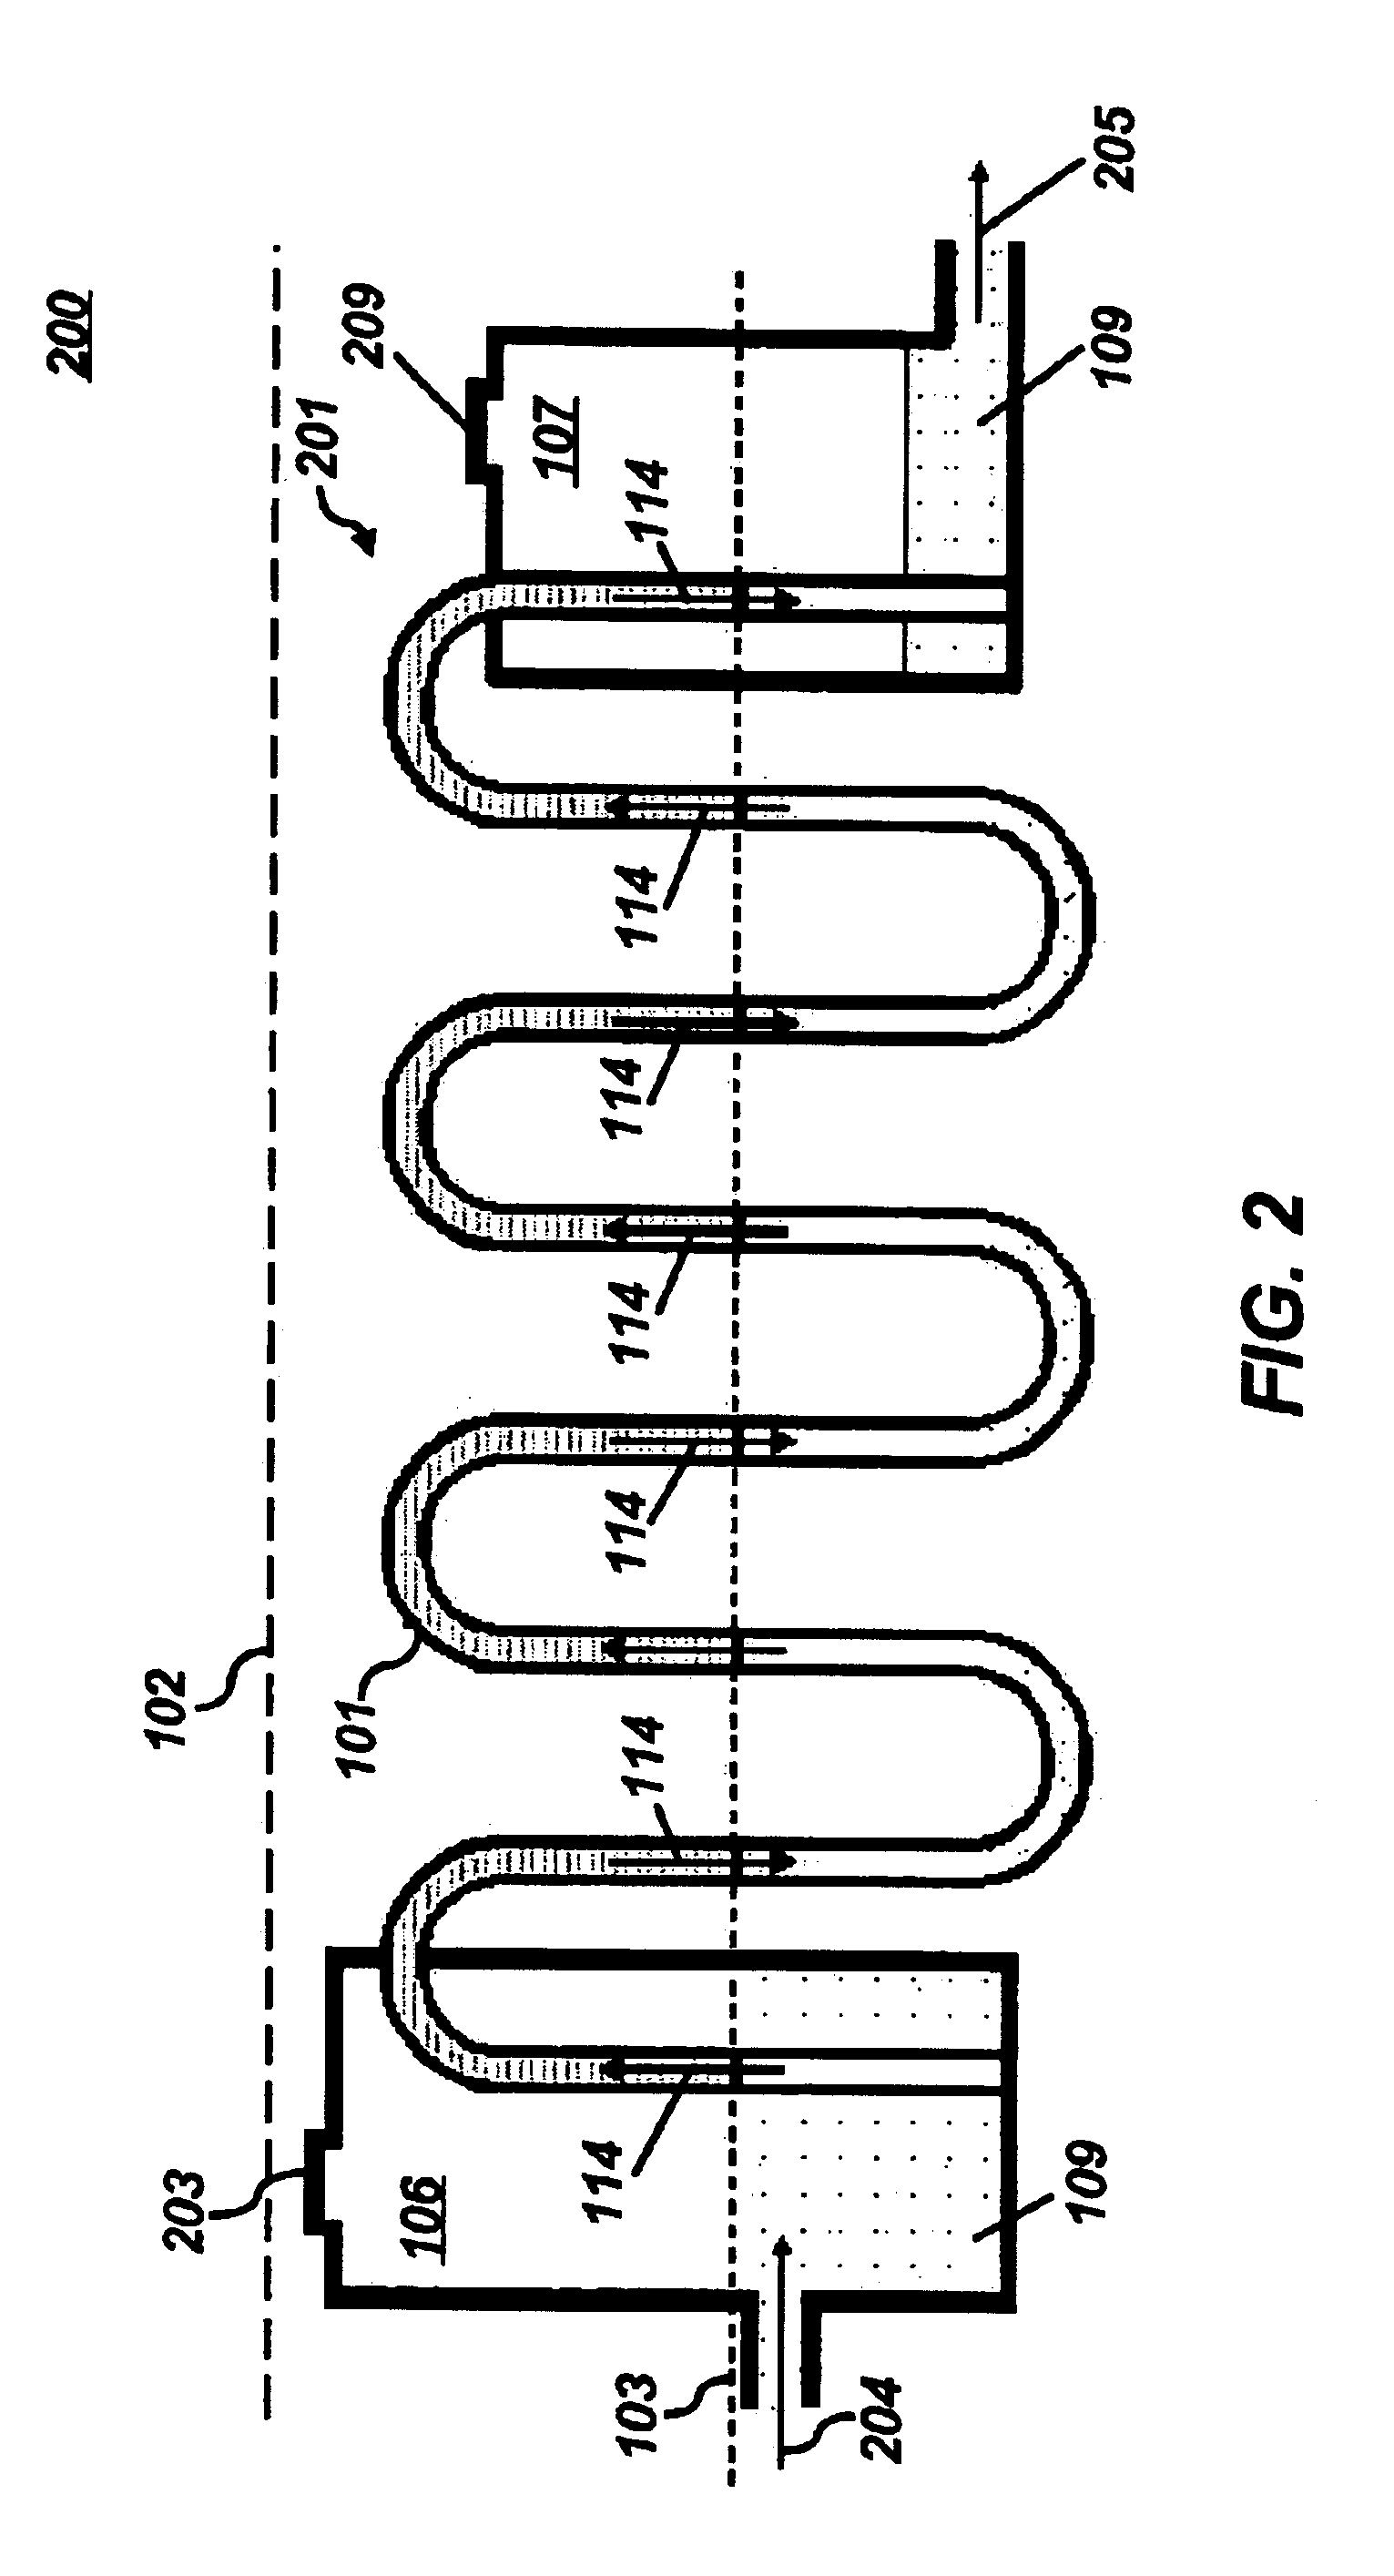 Irrigation and drainage based on hydrodynamic unsaturated fluid flow